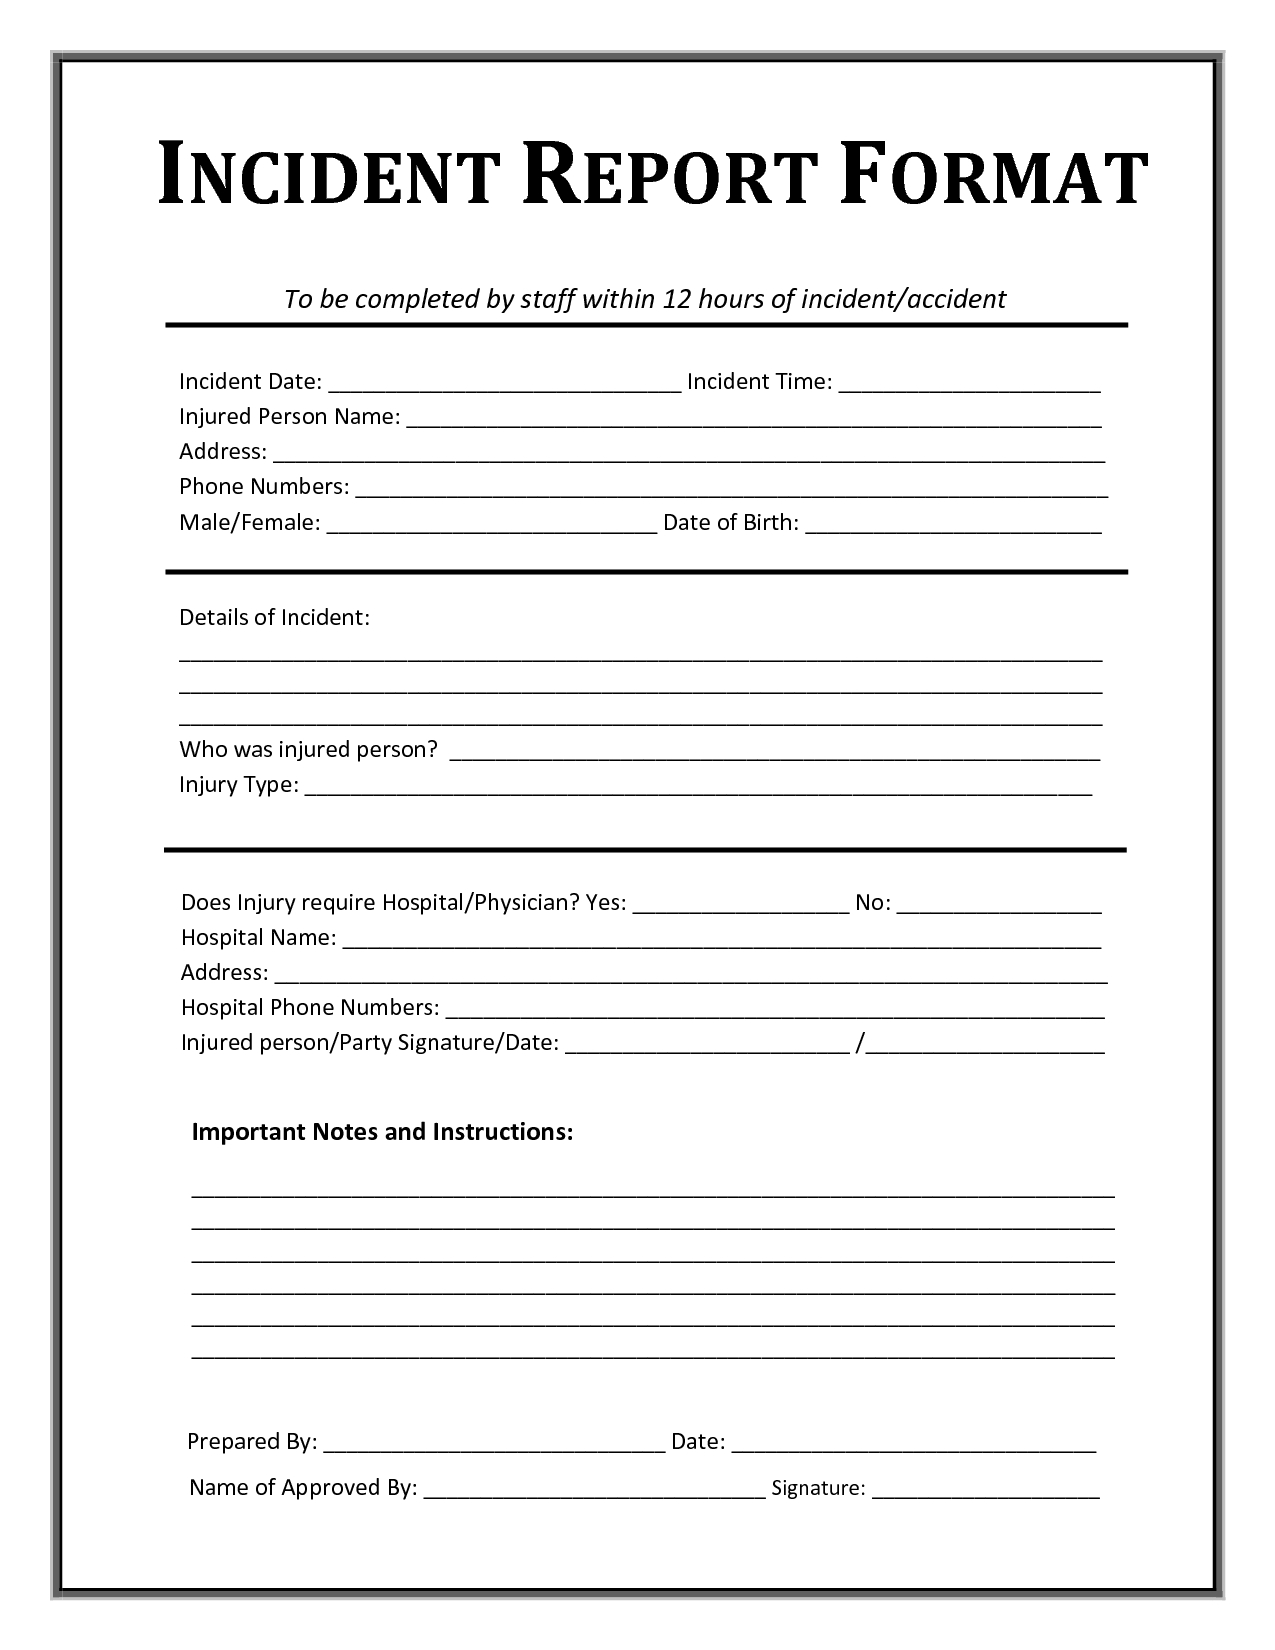 Incident Report Template | Incident Report Form, Incident Throughout Incident Report Form Template Word